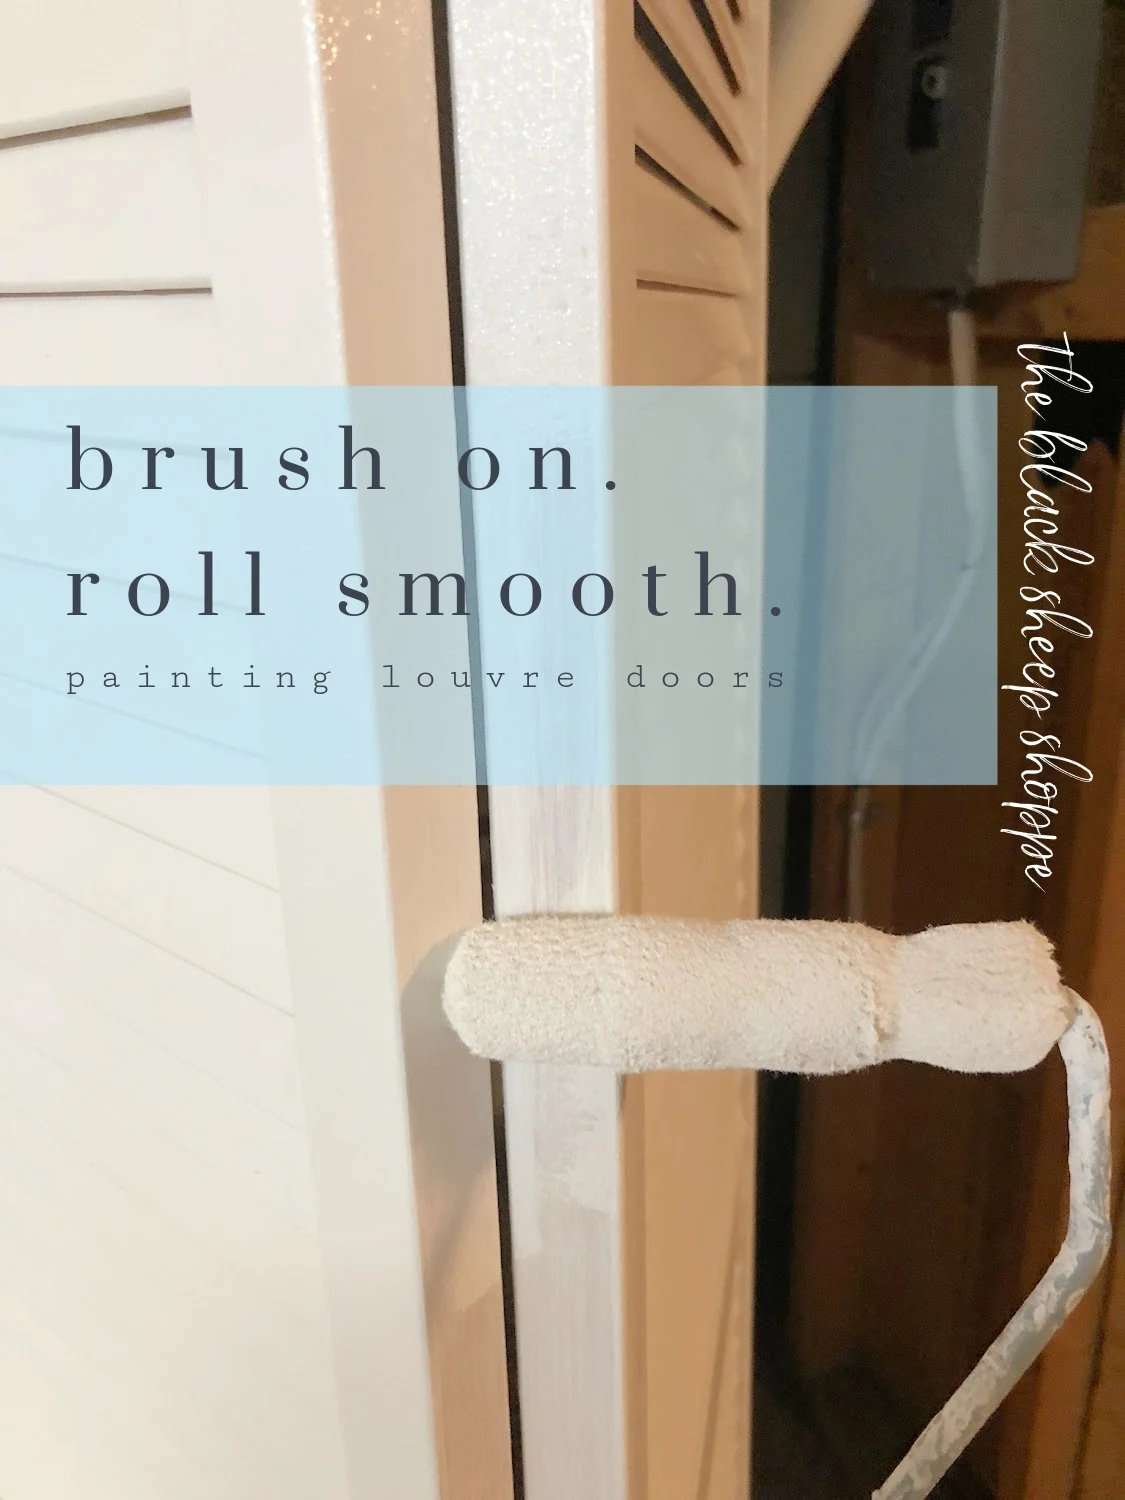 The secret to a professional finish is brush and roll.